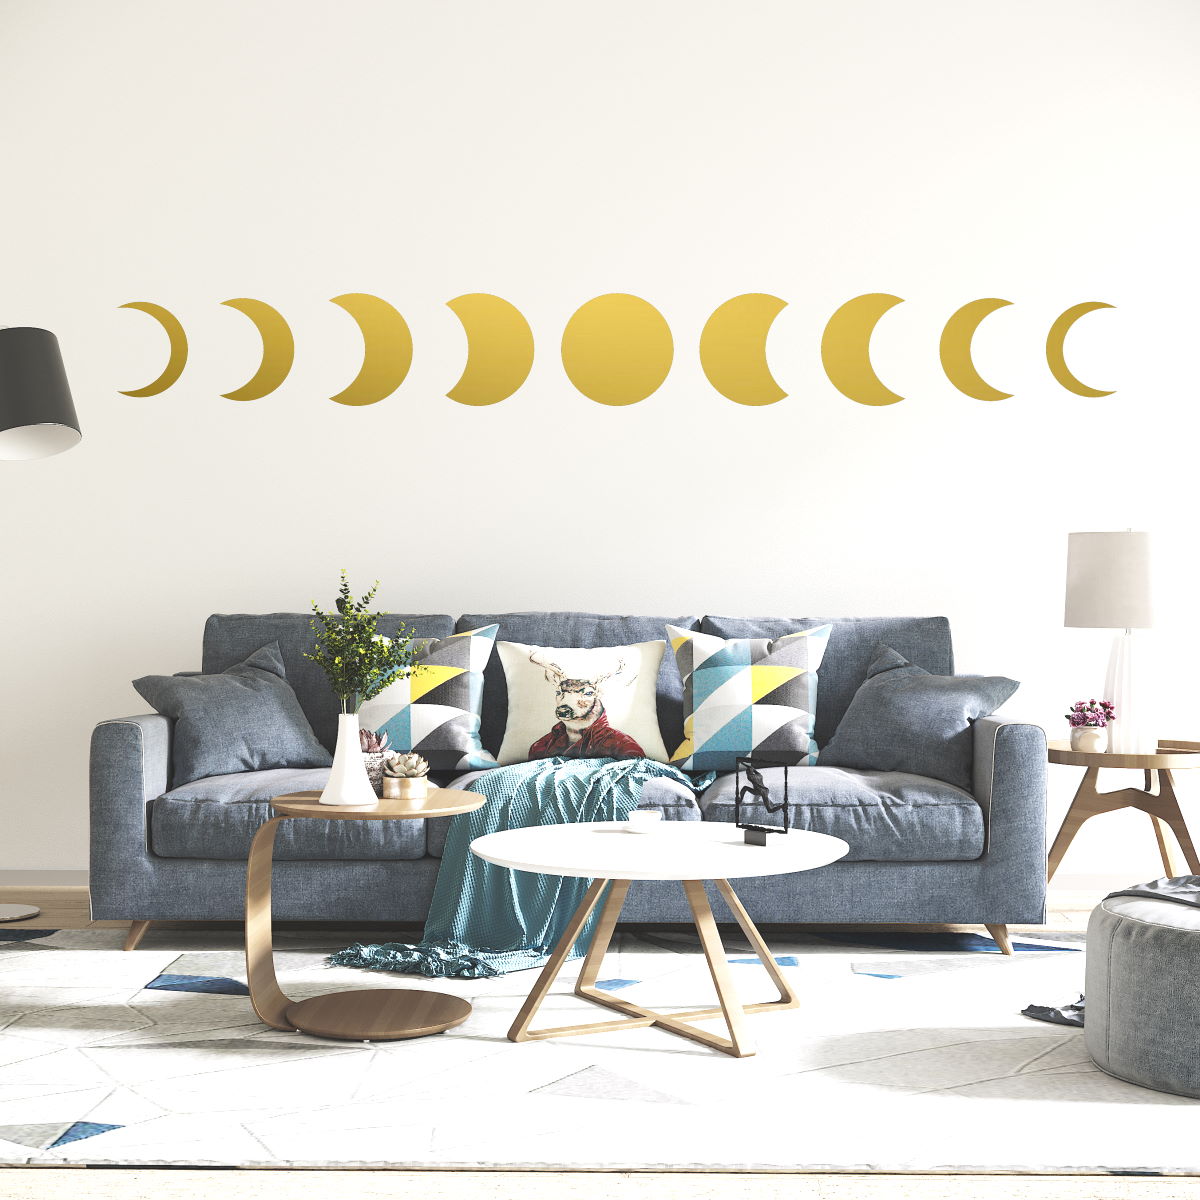 moon phase wall decal